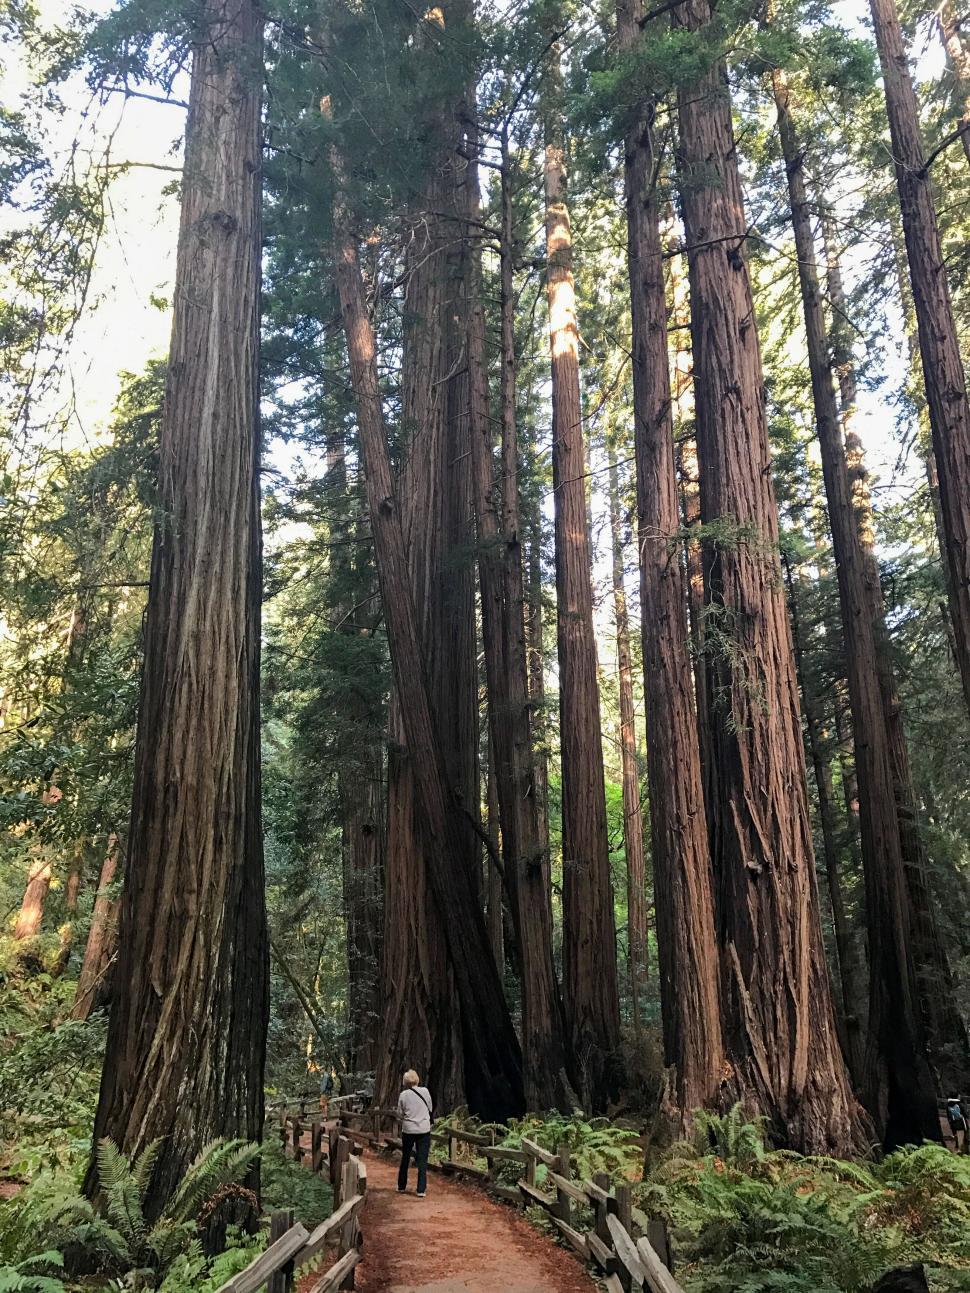 Free Image of Majestic redwood forest with person for scale 